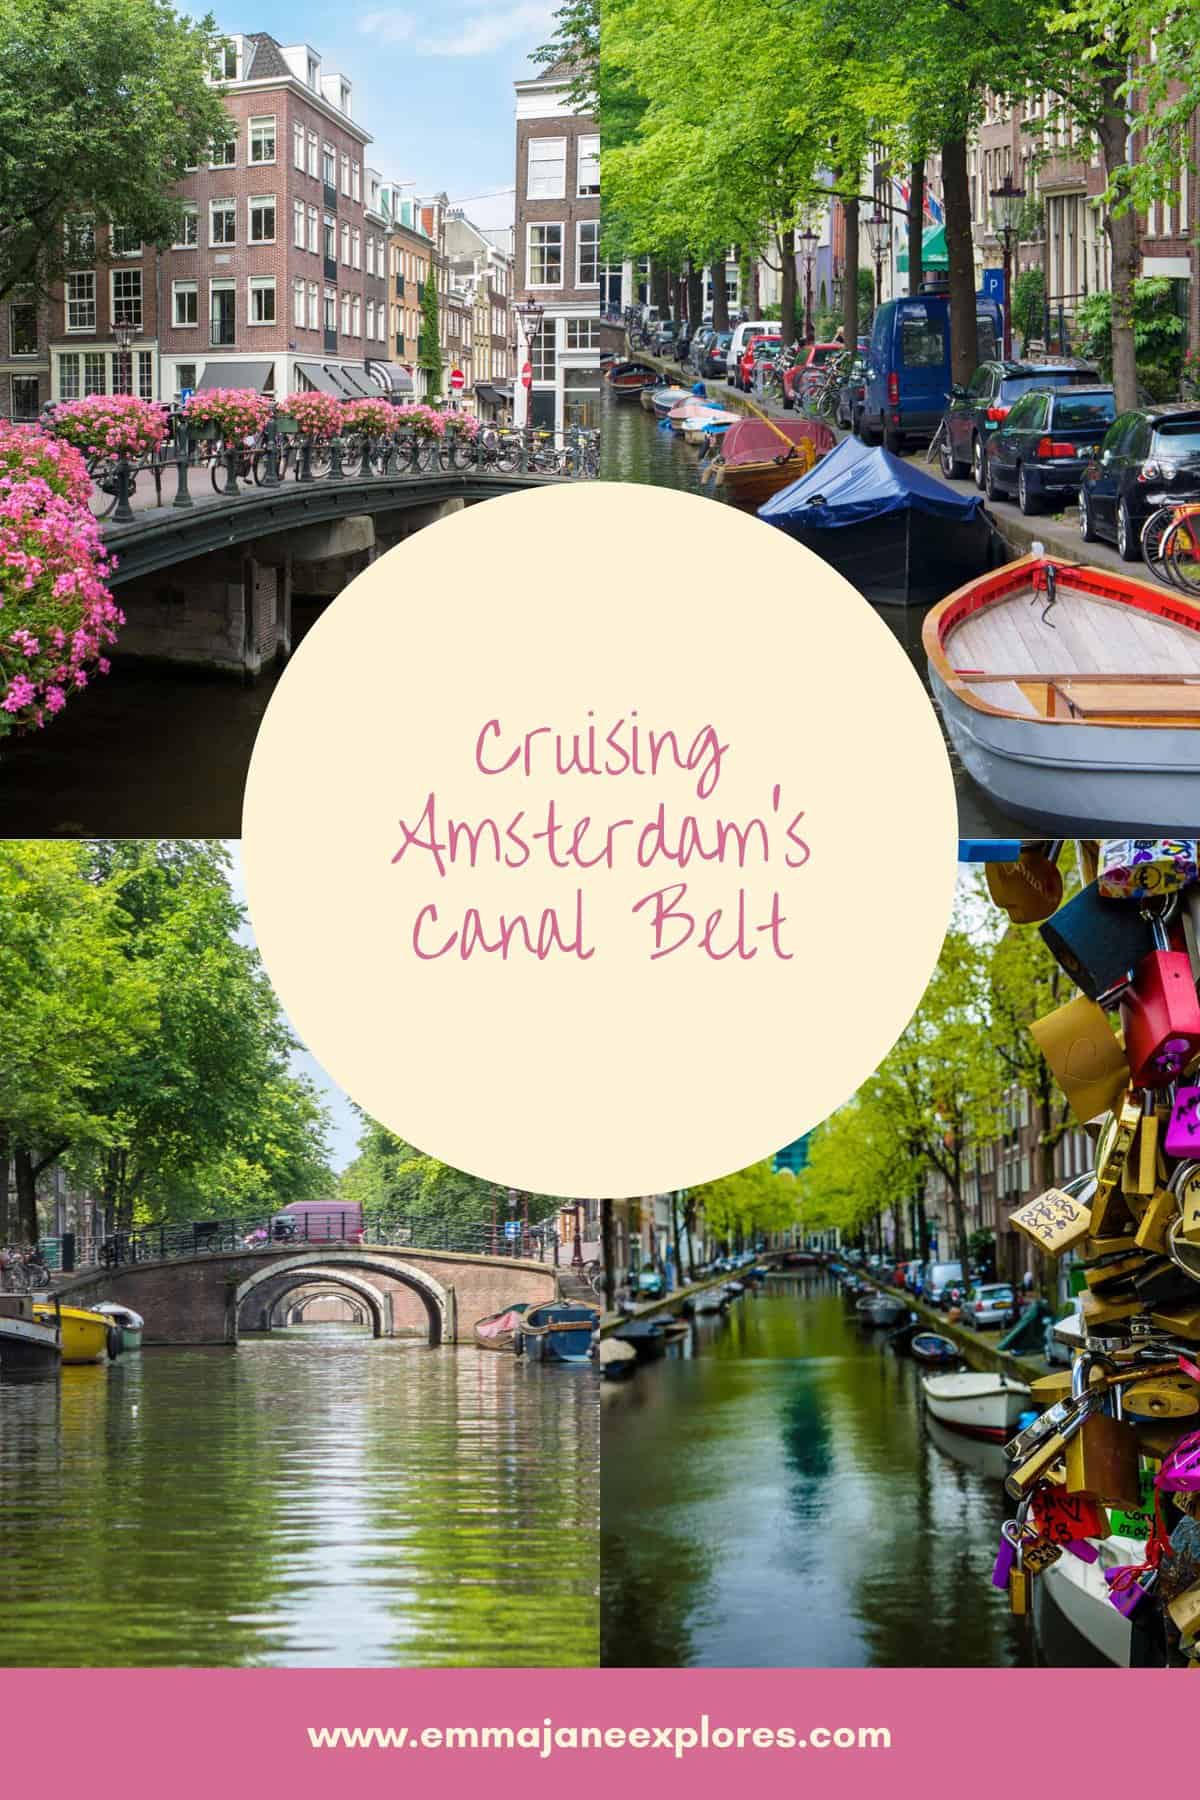 The Ultimate Guide To Taking An Open Boat Cruise In Amsterdam - Emma Jane Explores